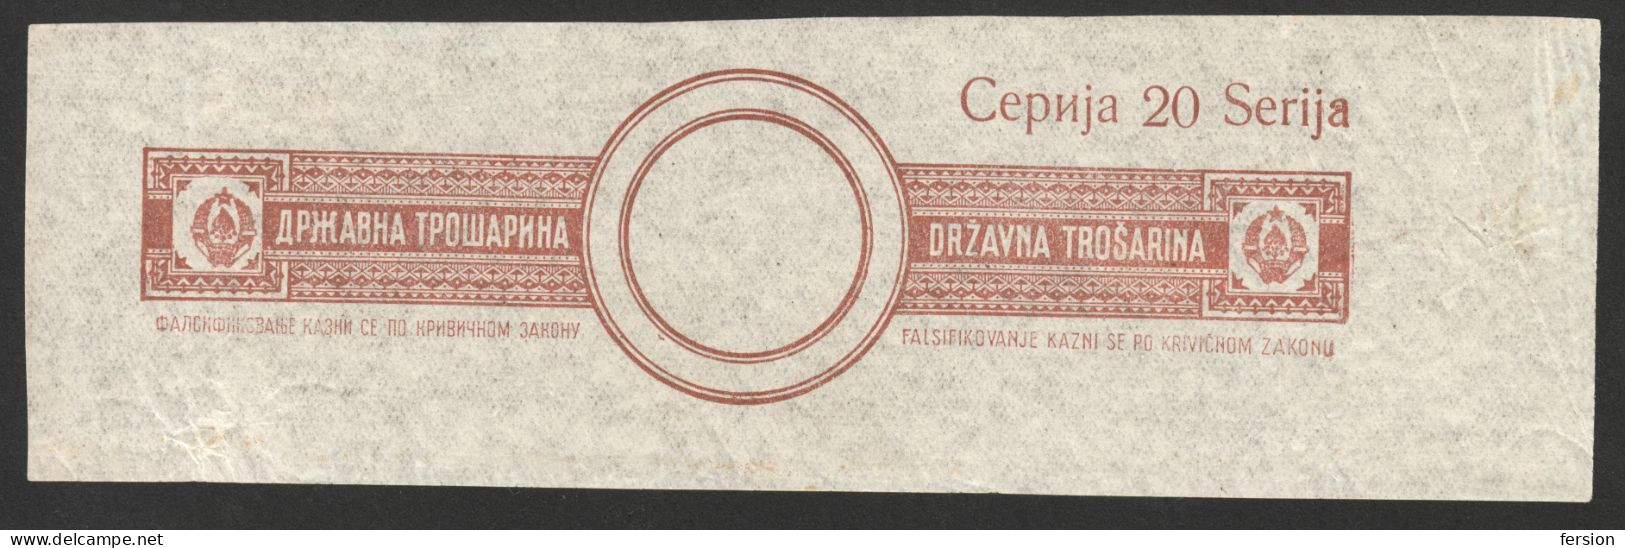 Yugoslavia 1945 EXCISE Revenue Fiscal Luxury Tax CONTROL BAND Stamp / Stripe Seal - Ser. No. 20 - Coat Of Arms - Officials